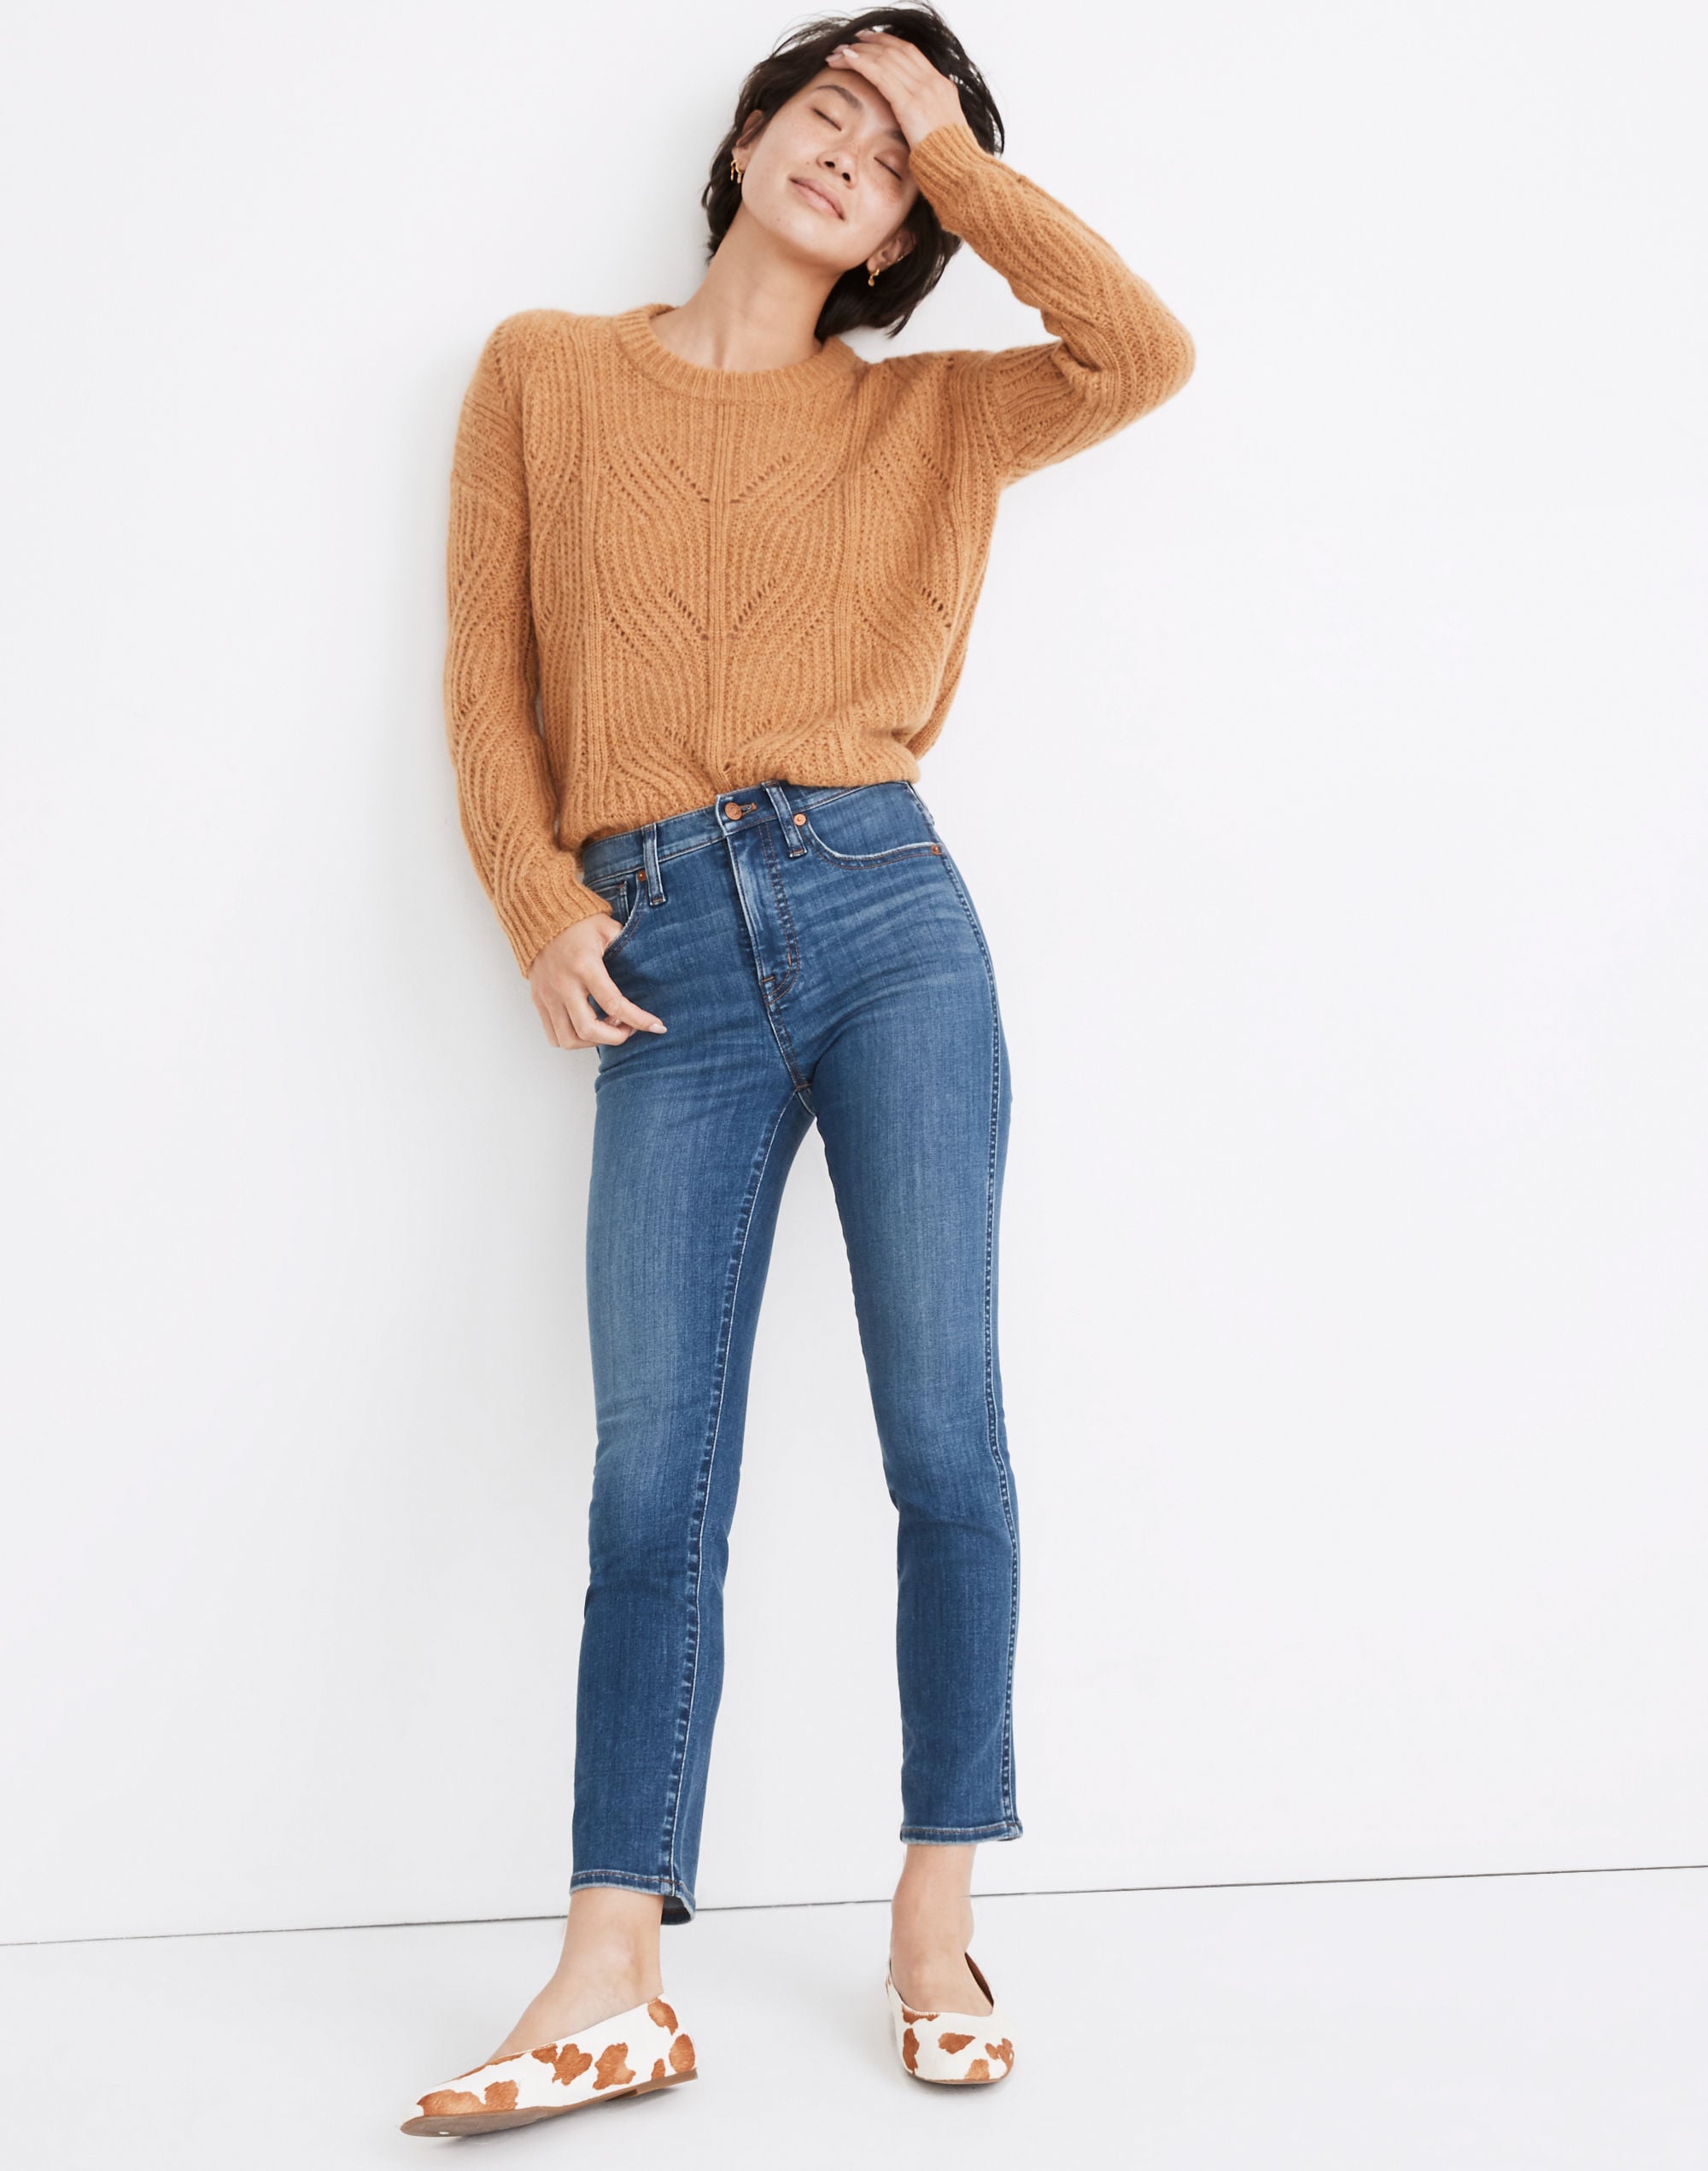 NEW Madewell Stovepipe Jeans in Leaside Wash, 26